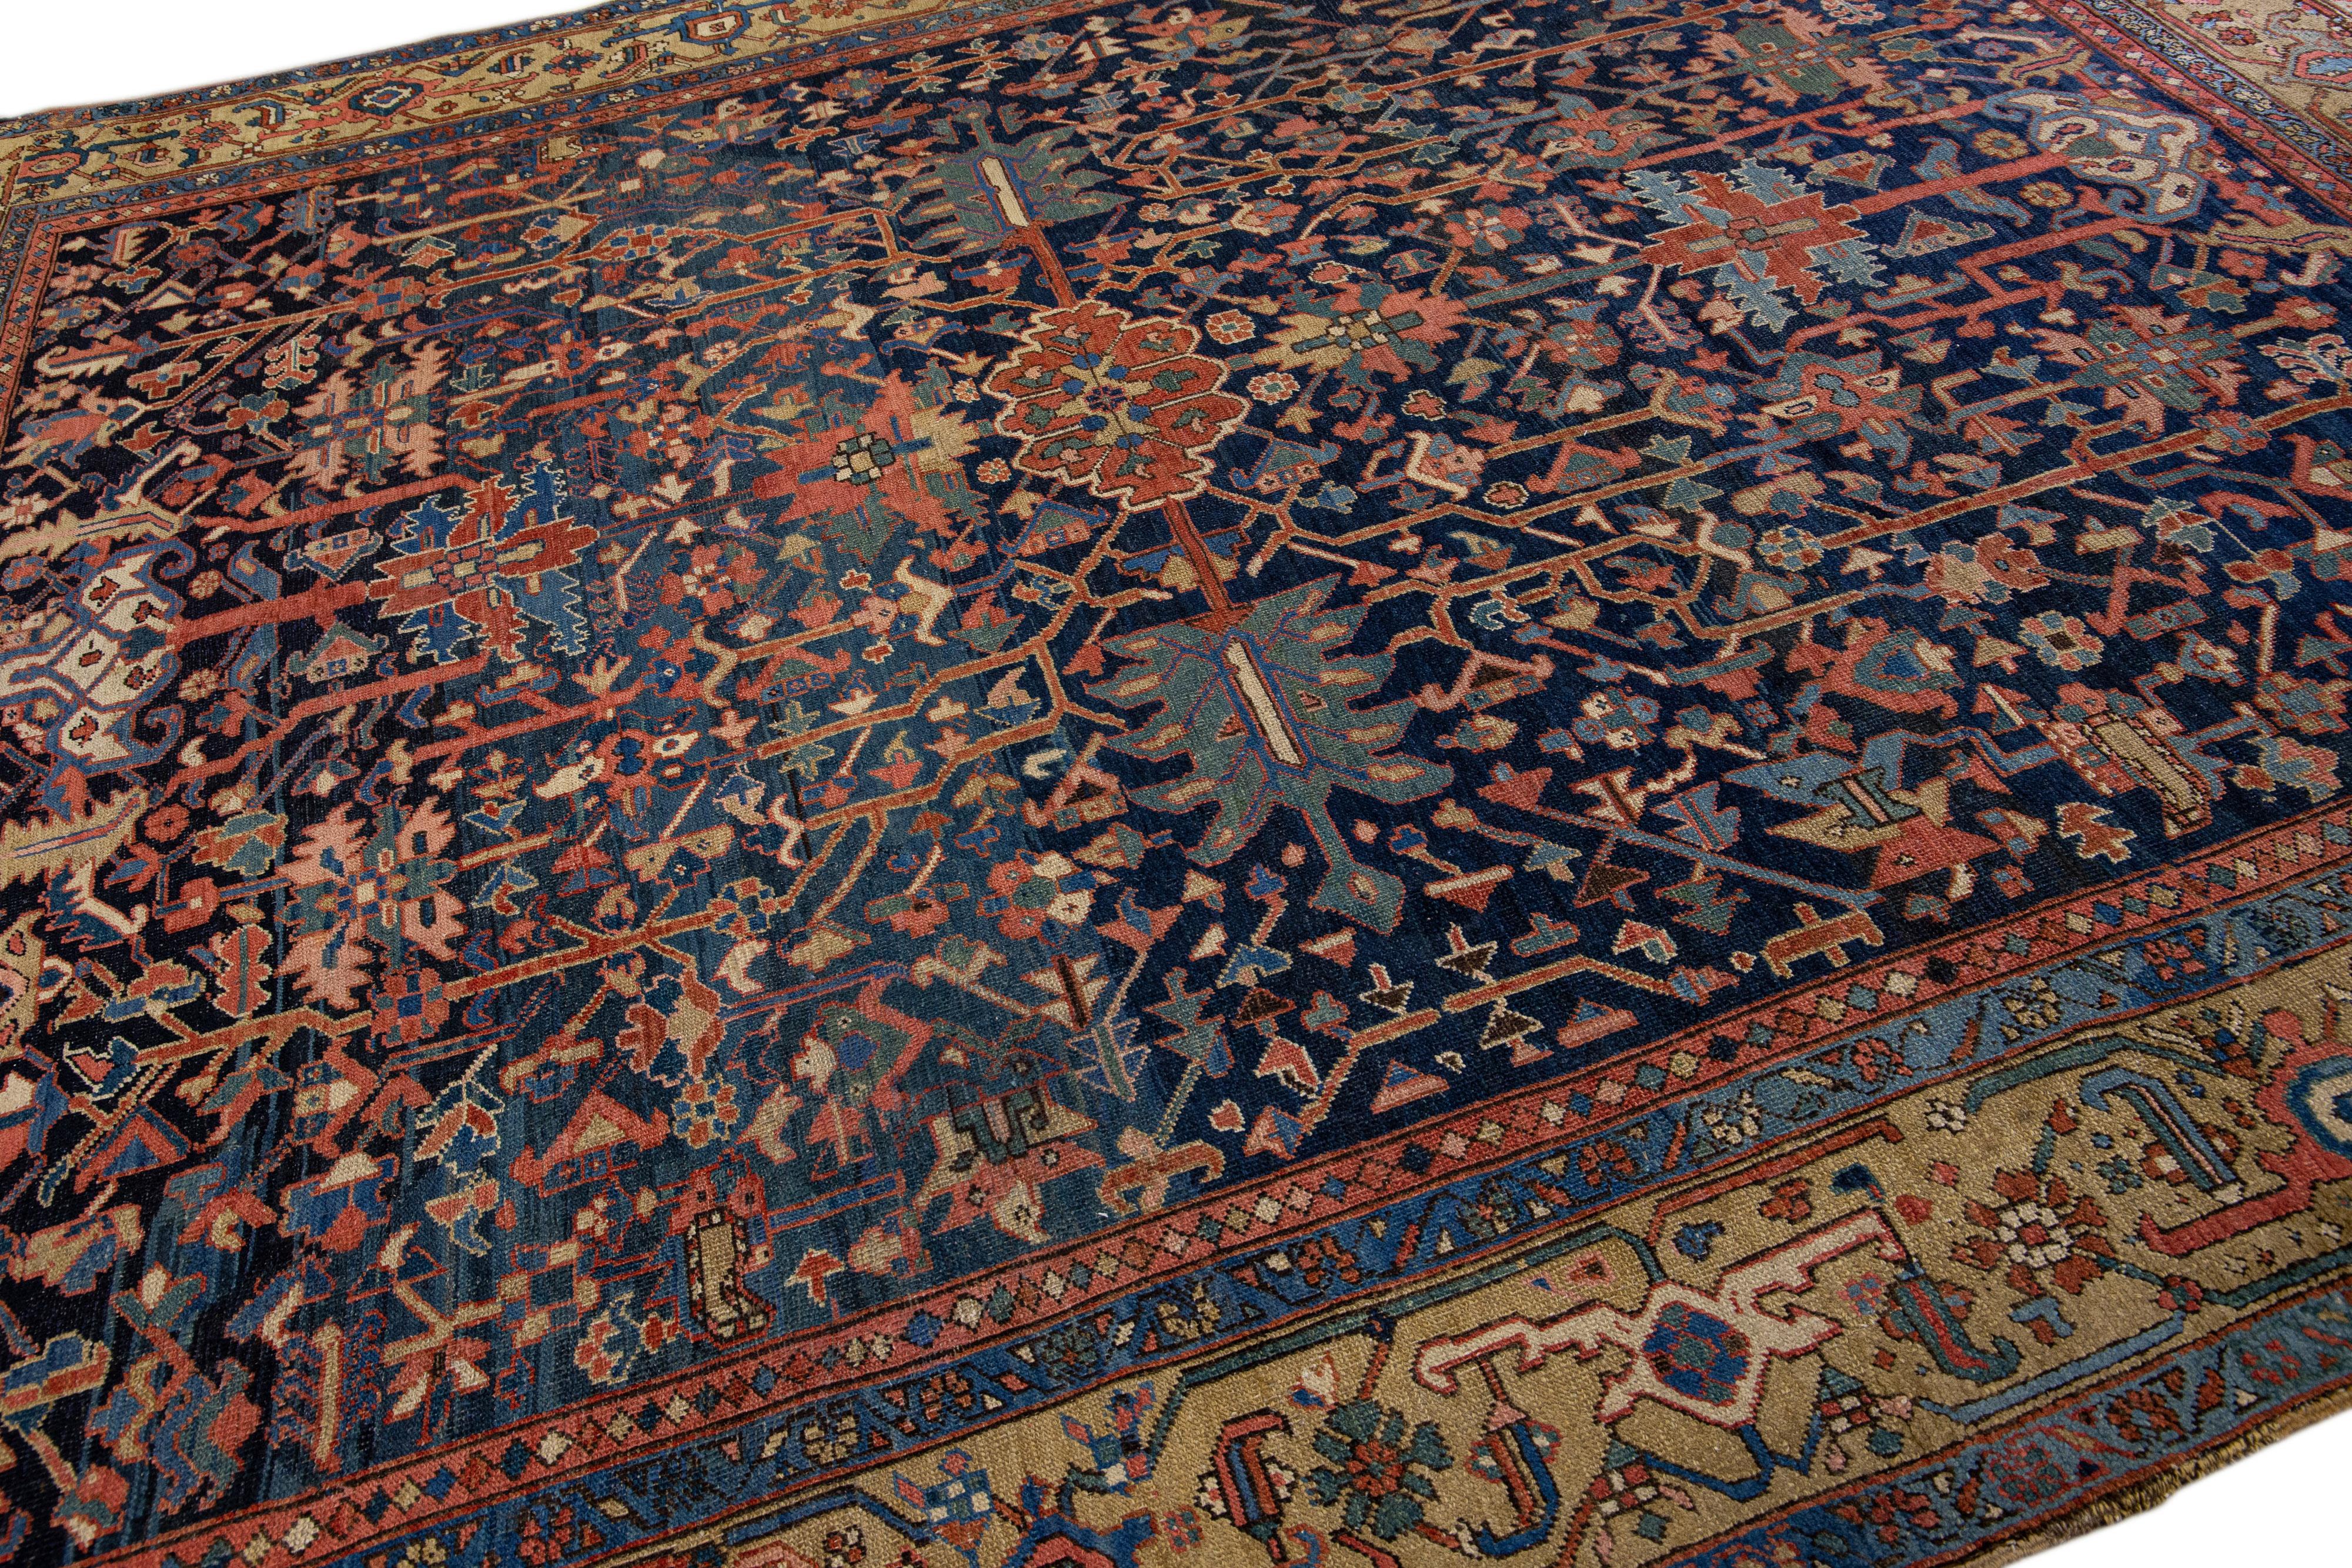 Beautiful antique Heriz hand-knotted wool rug with a blue field. This Persian rug has brown accents in a gorgeous all-over geometric floral design.

This rug measures: 9'8